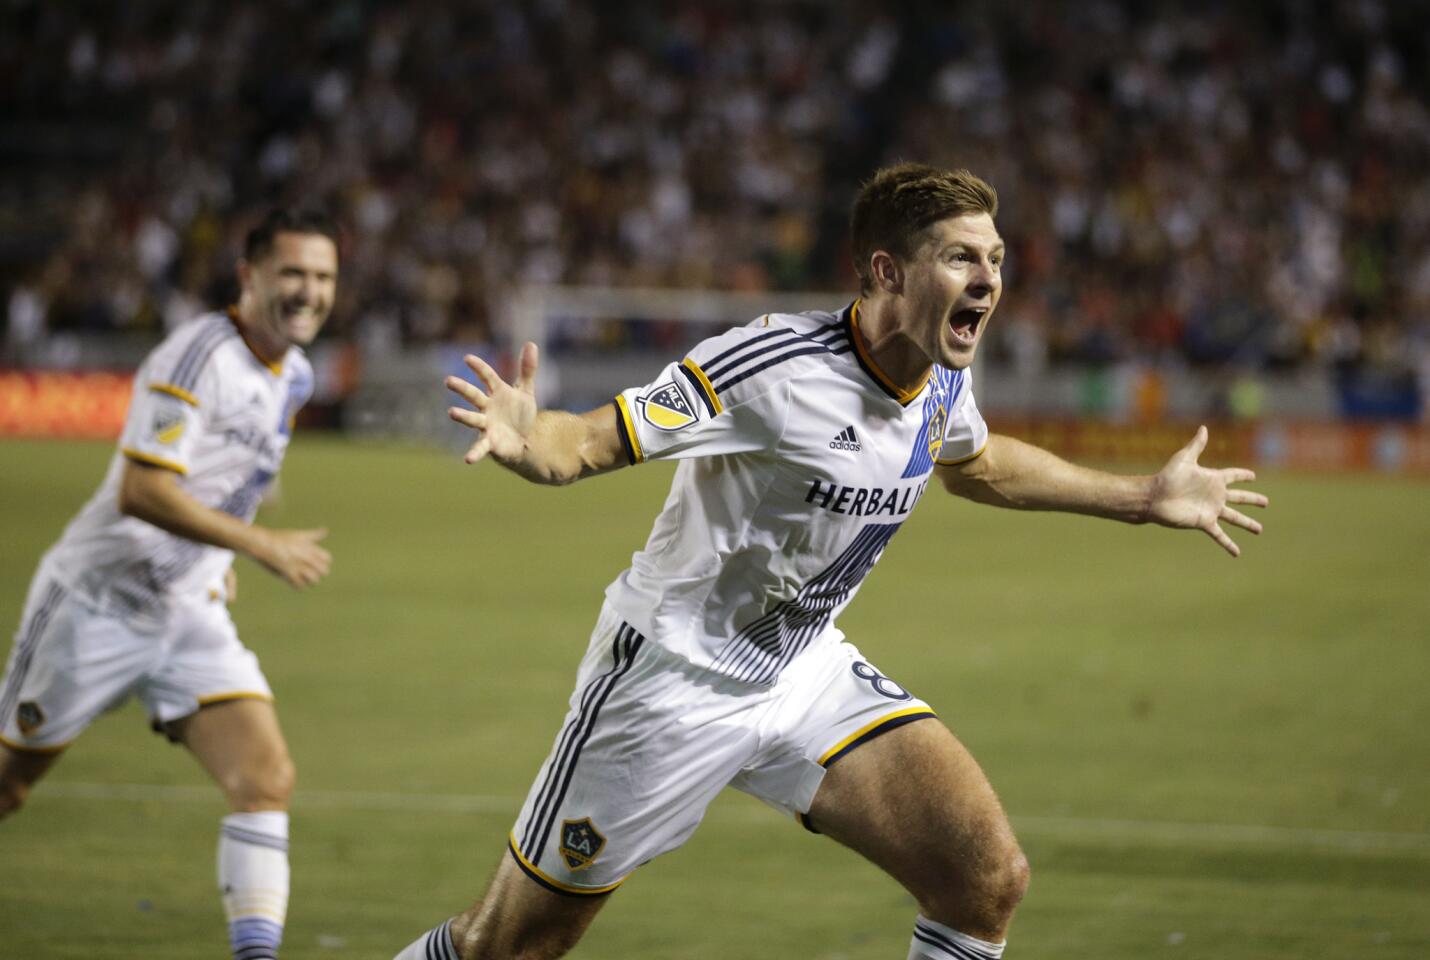 Los Angeles Galaxy's Steven Gerrard, of England, celebrates his first goal for the team, during the first half of an MLS soccer match against the San Jose Earthquakes, Friday, July 17, 2015, in Carson, Calif. (AP Photo/Jae C. Hong)